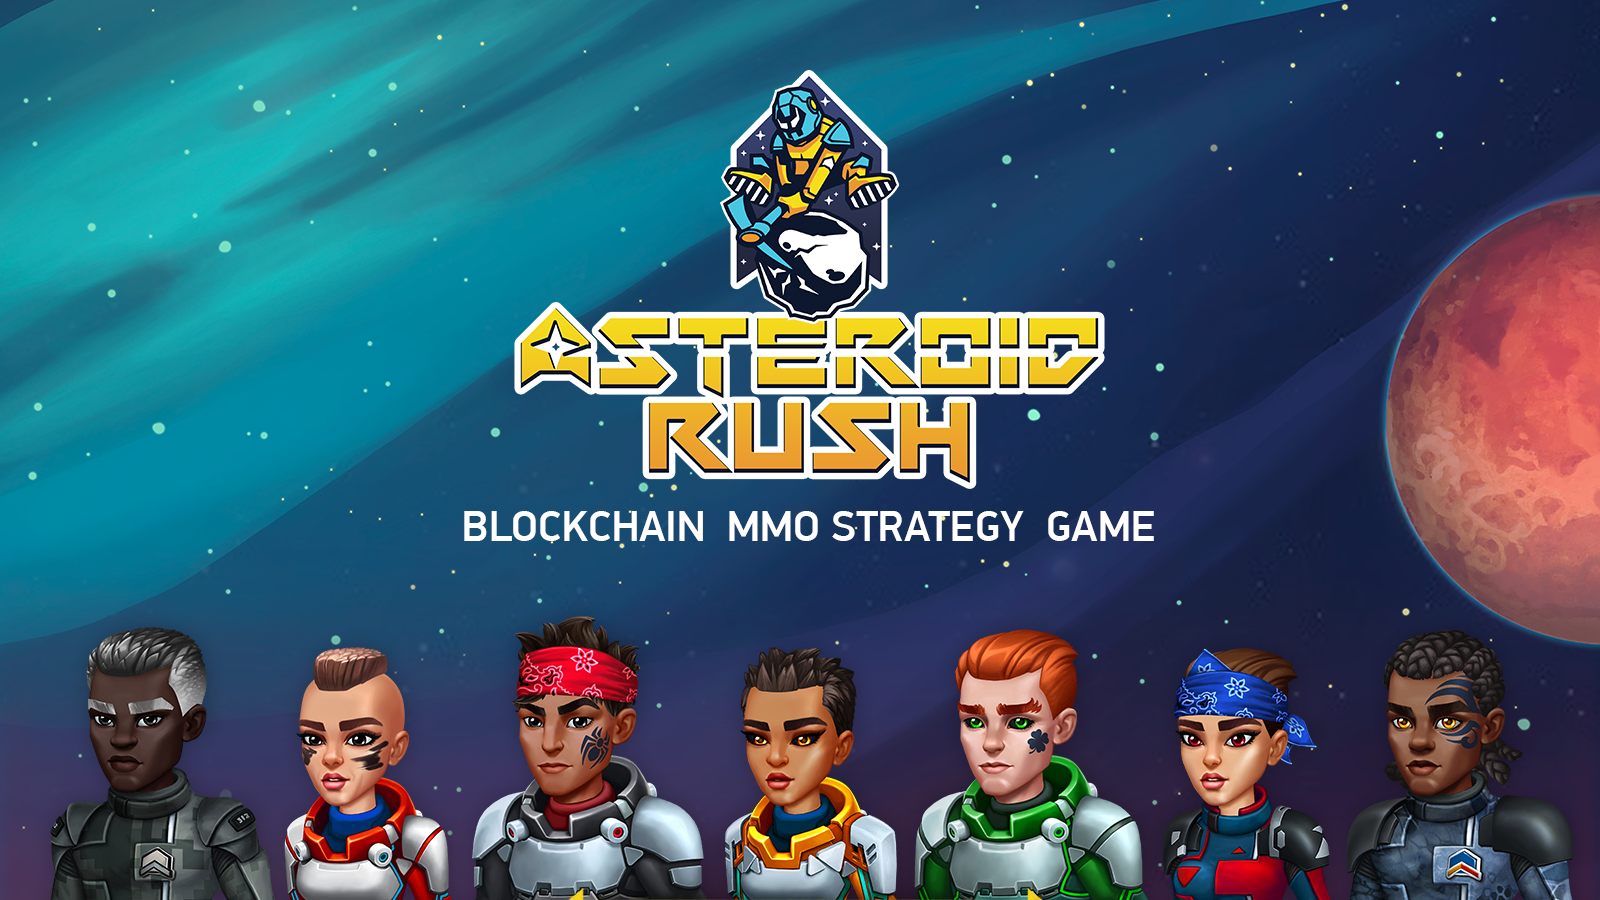 Asteroid Rush game